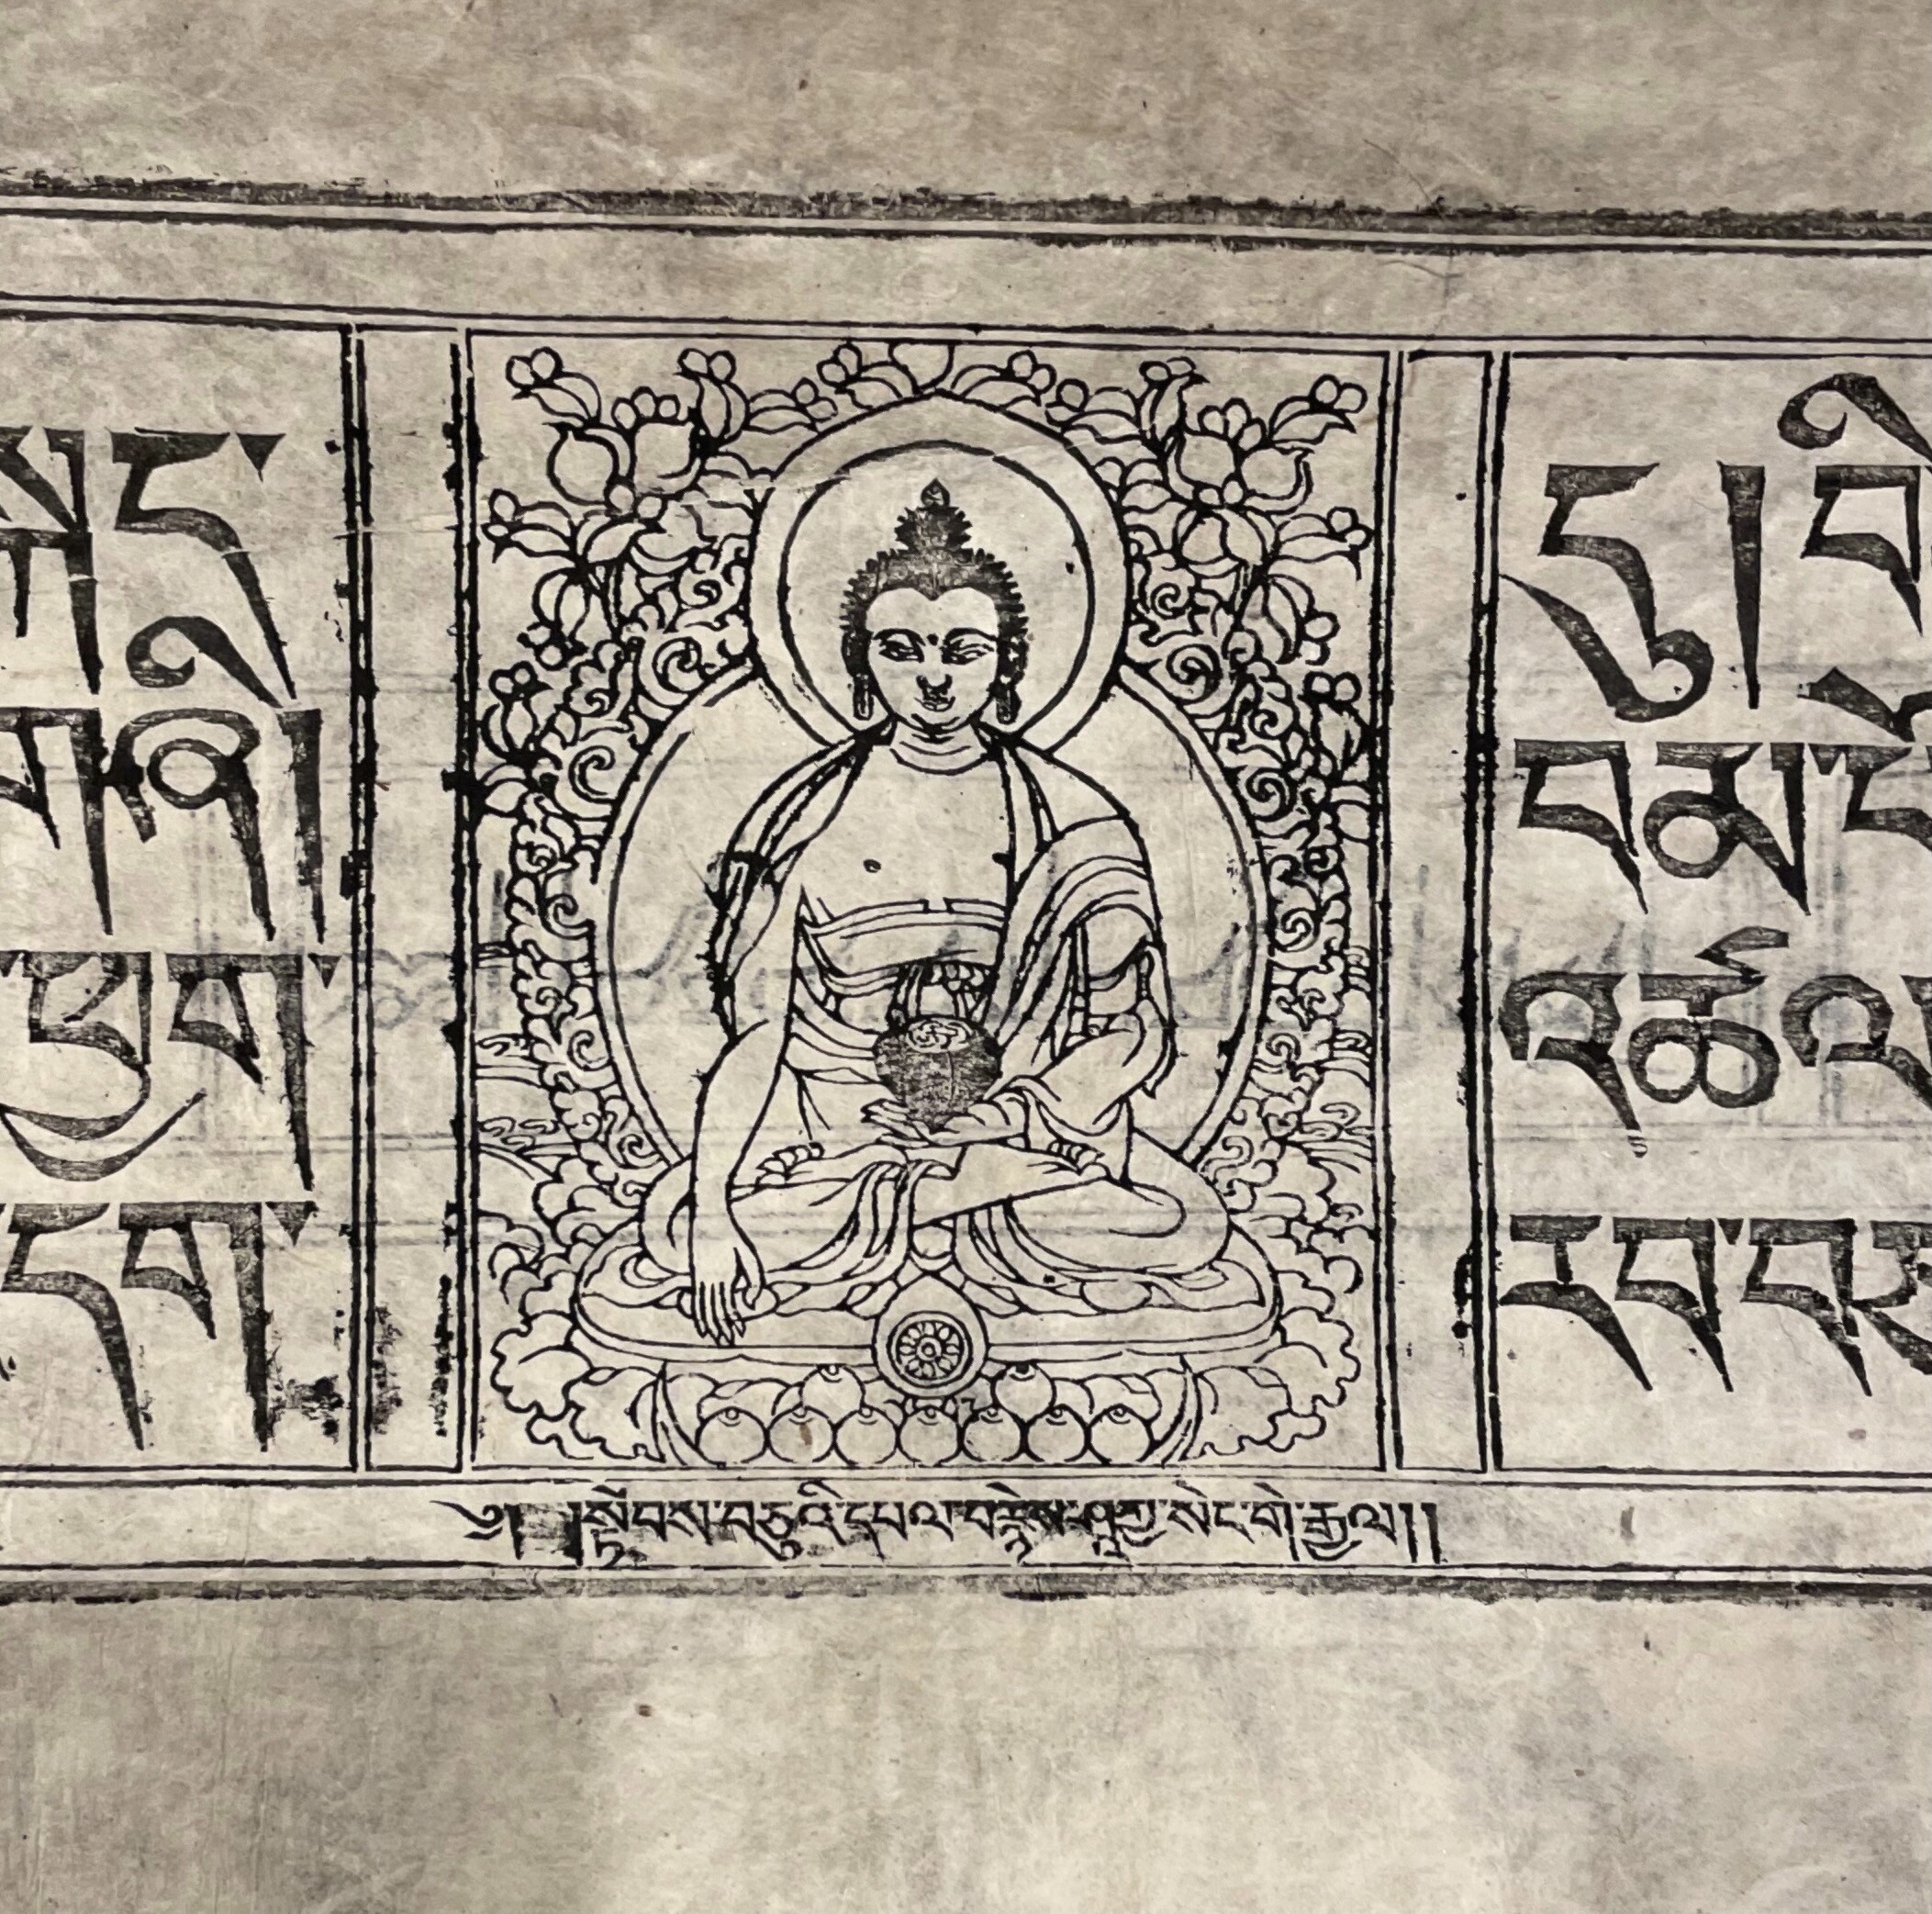 An image of a printed Tibetan text featuring a woodcut of the Buddha.